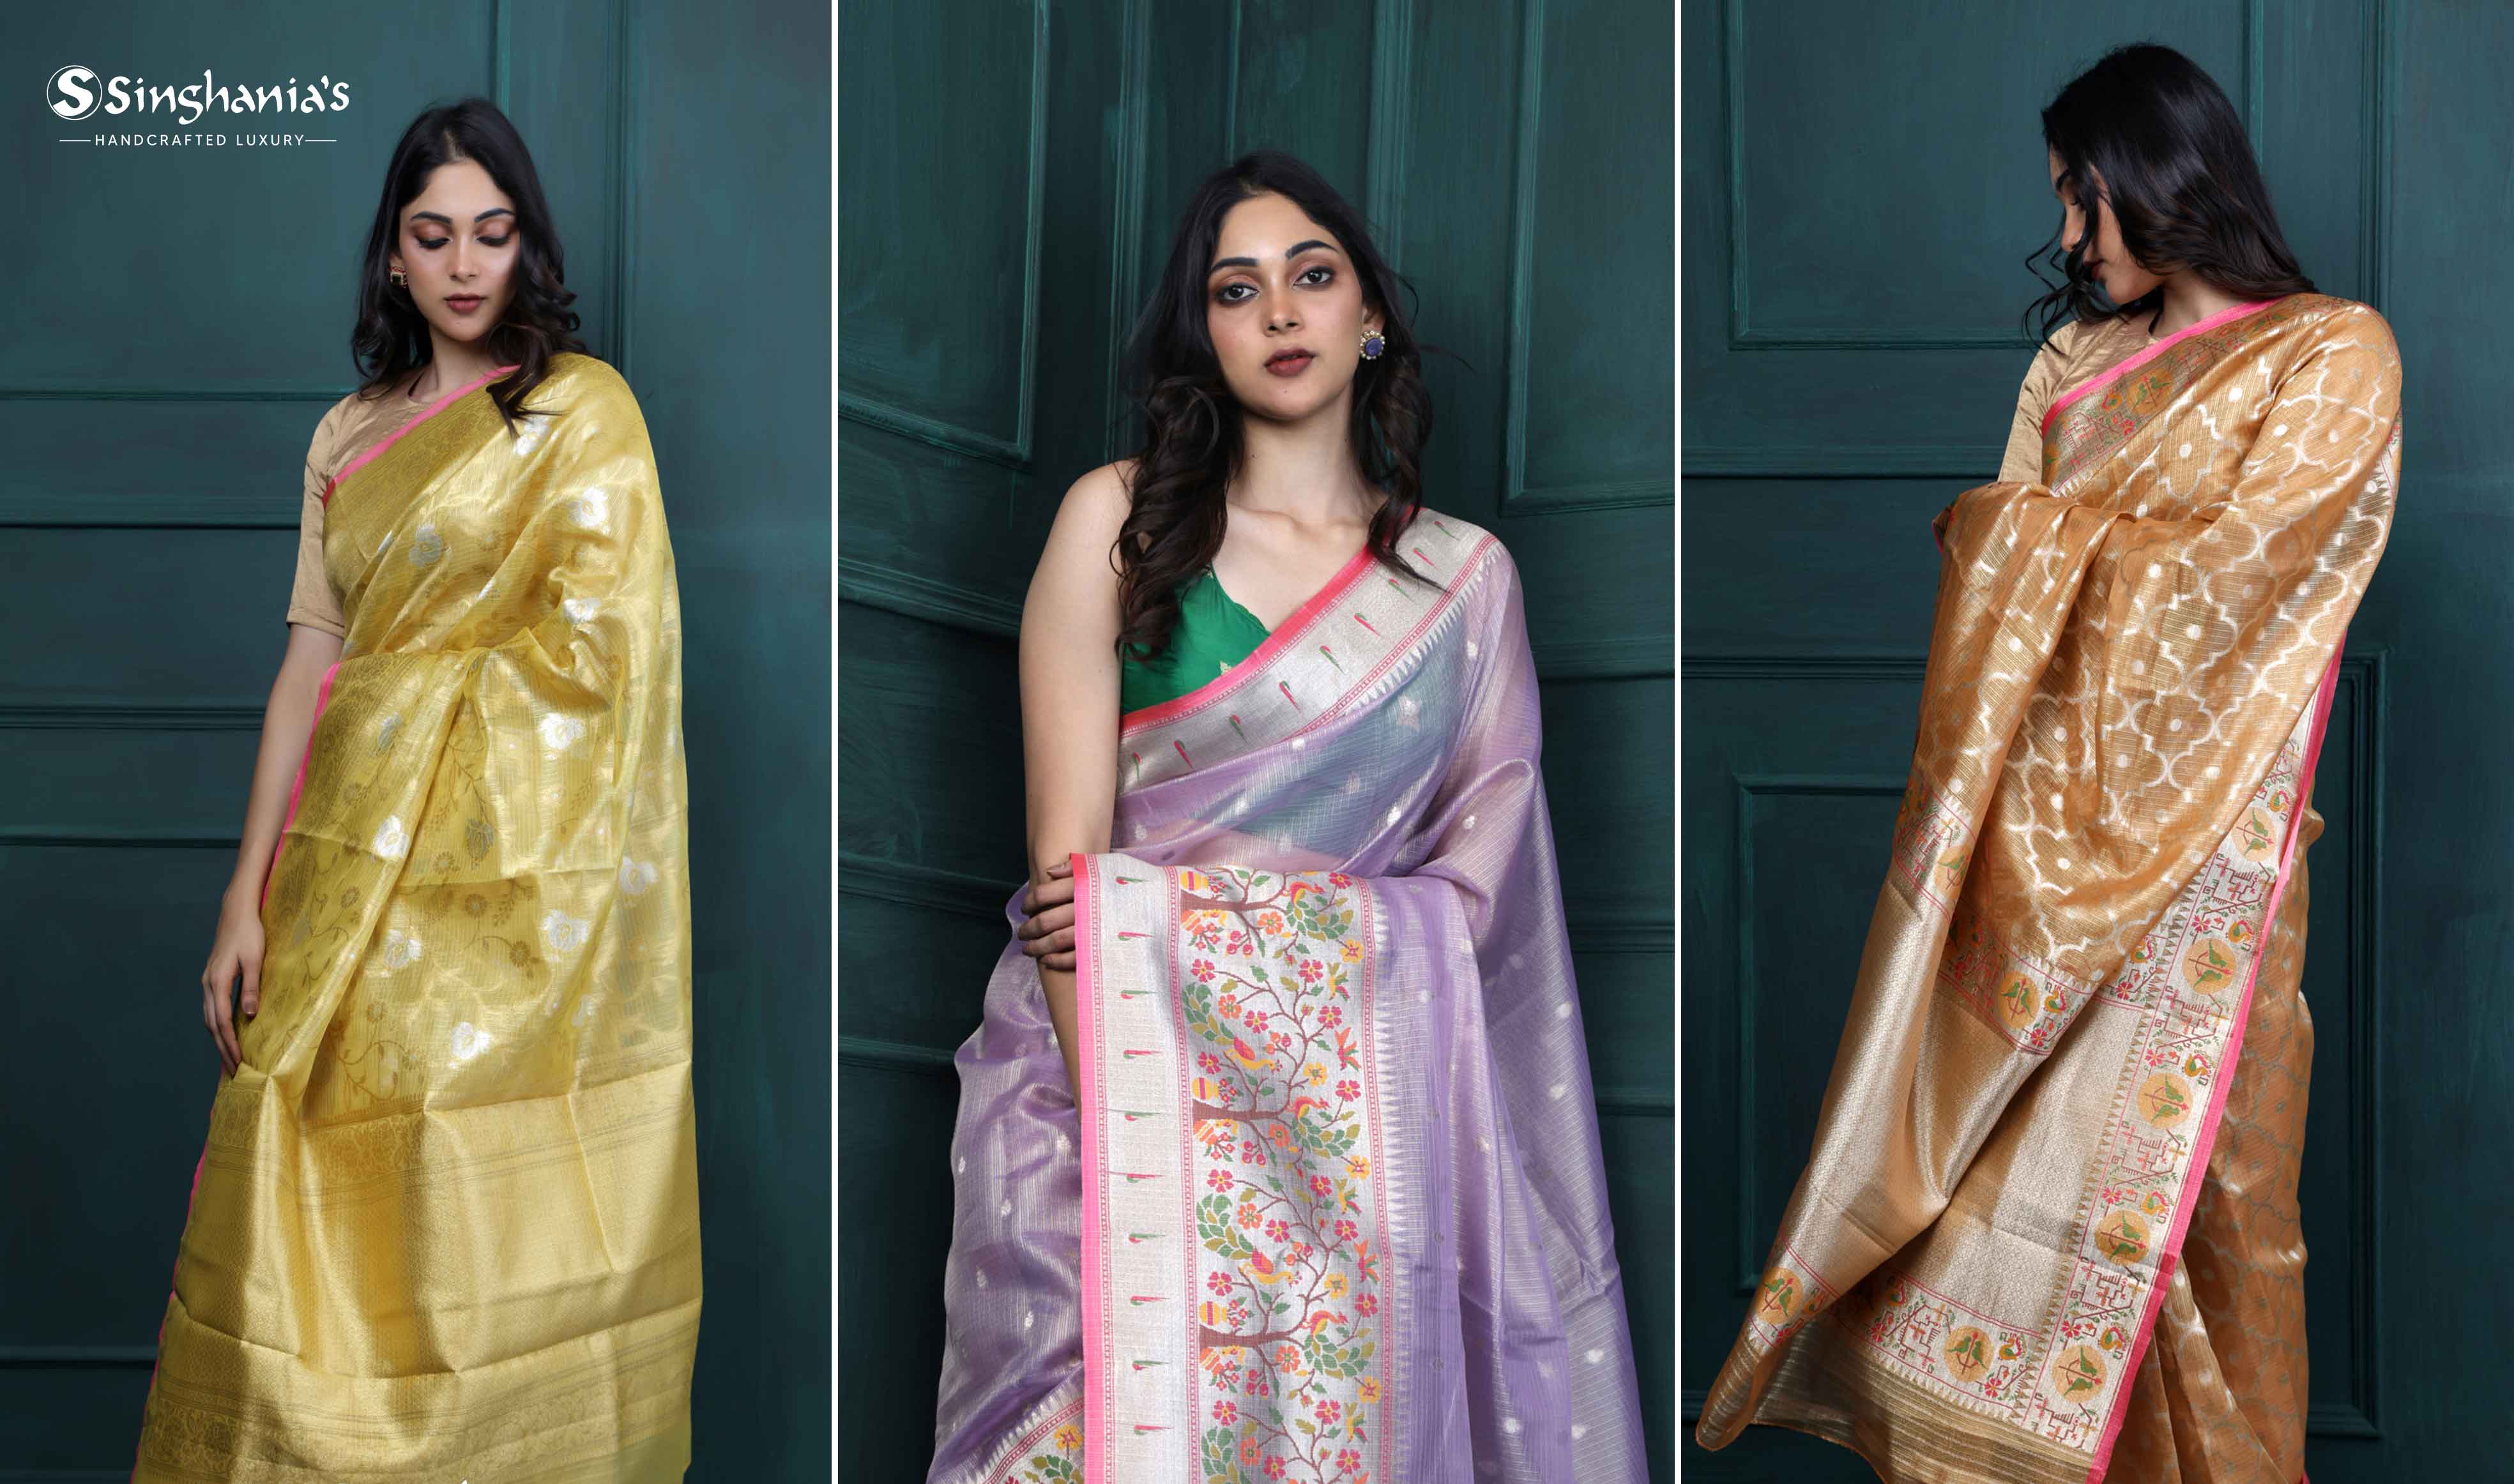 Weaving Wonders: A Journey into the Making of Kota Silk Sarees